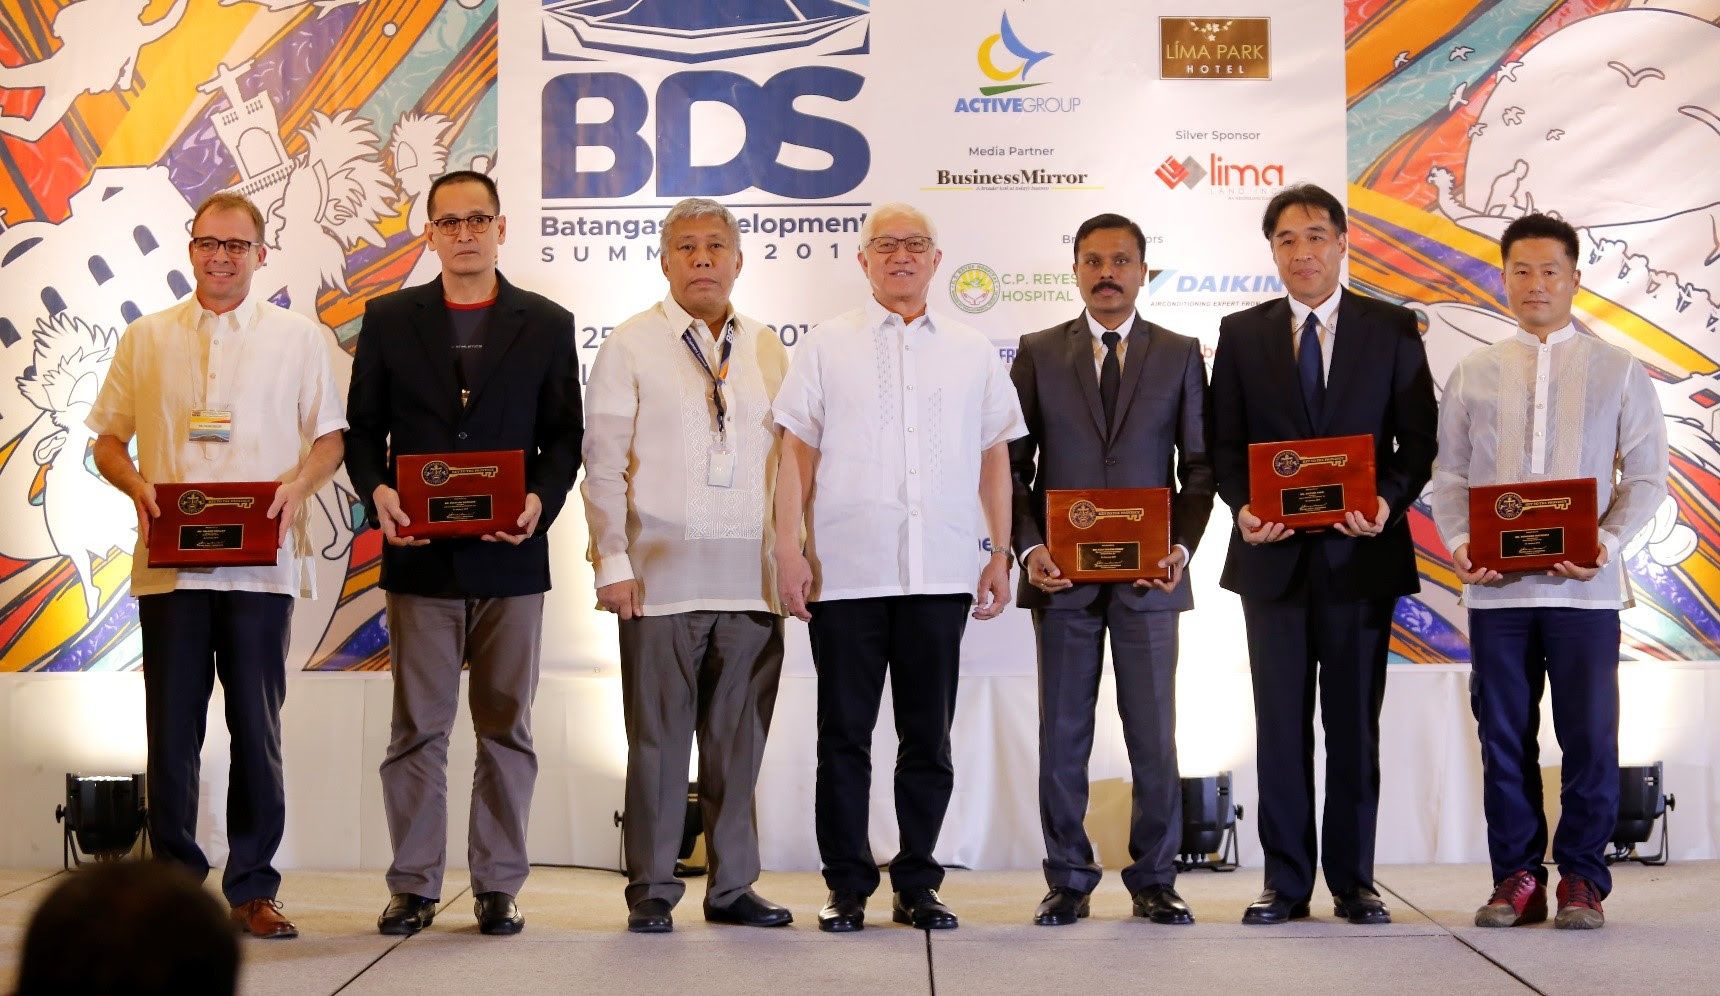 Summit focuses on opportunities and investments in Batangas